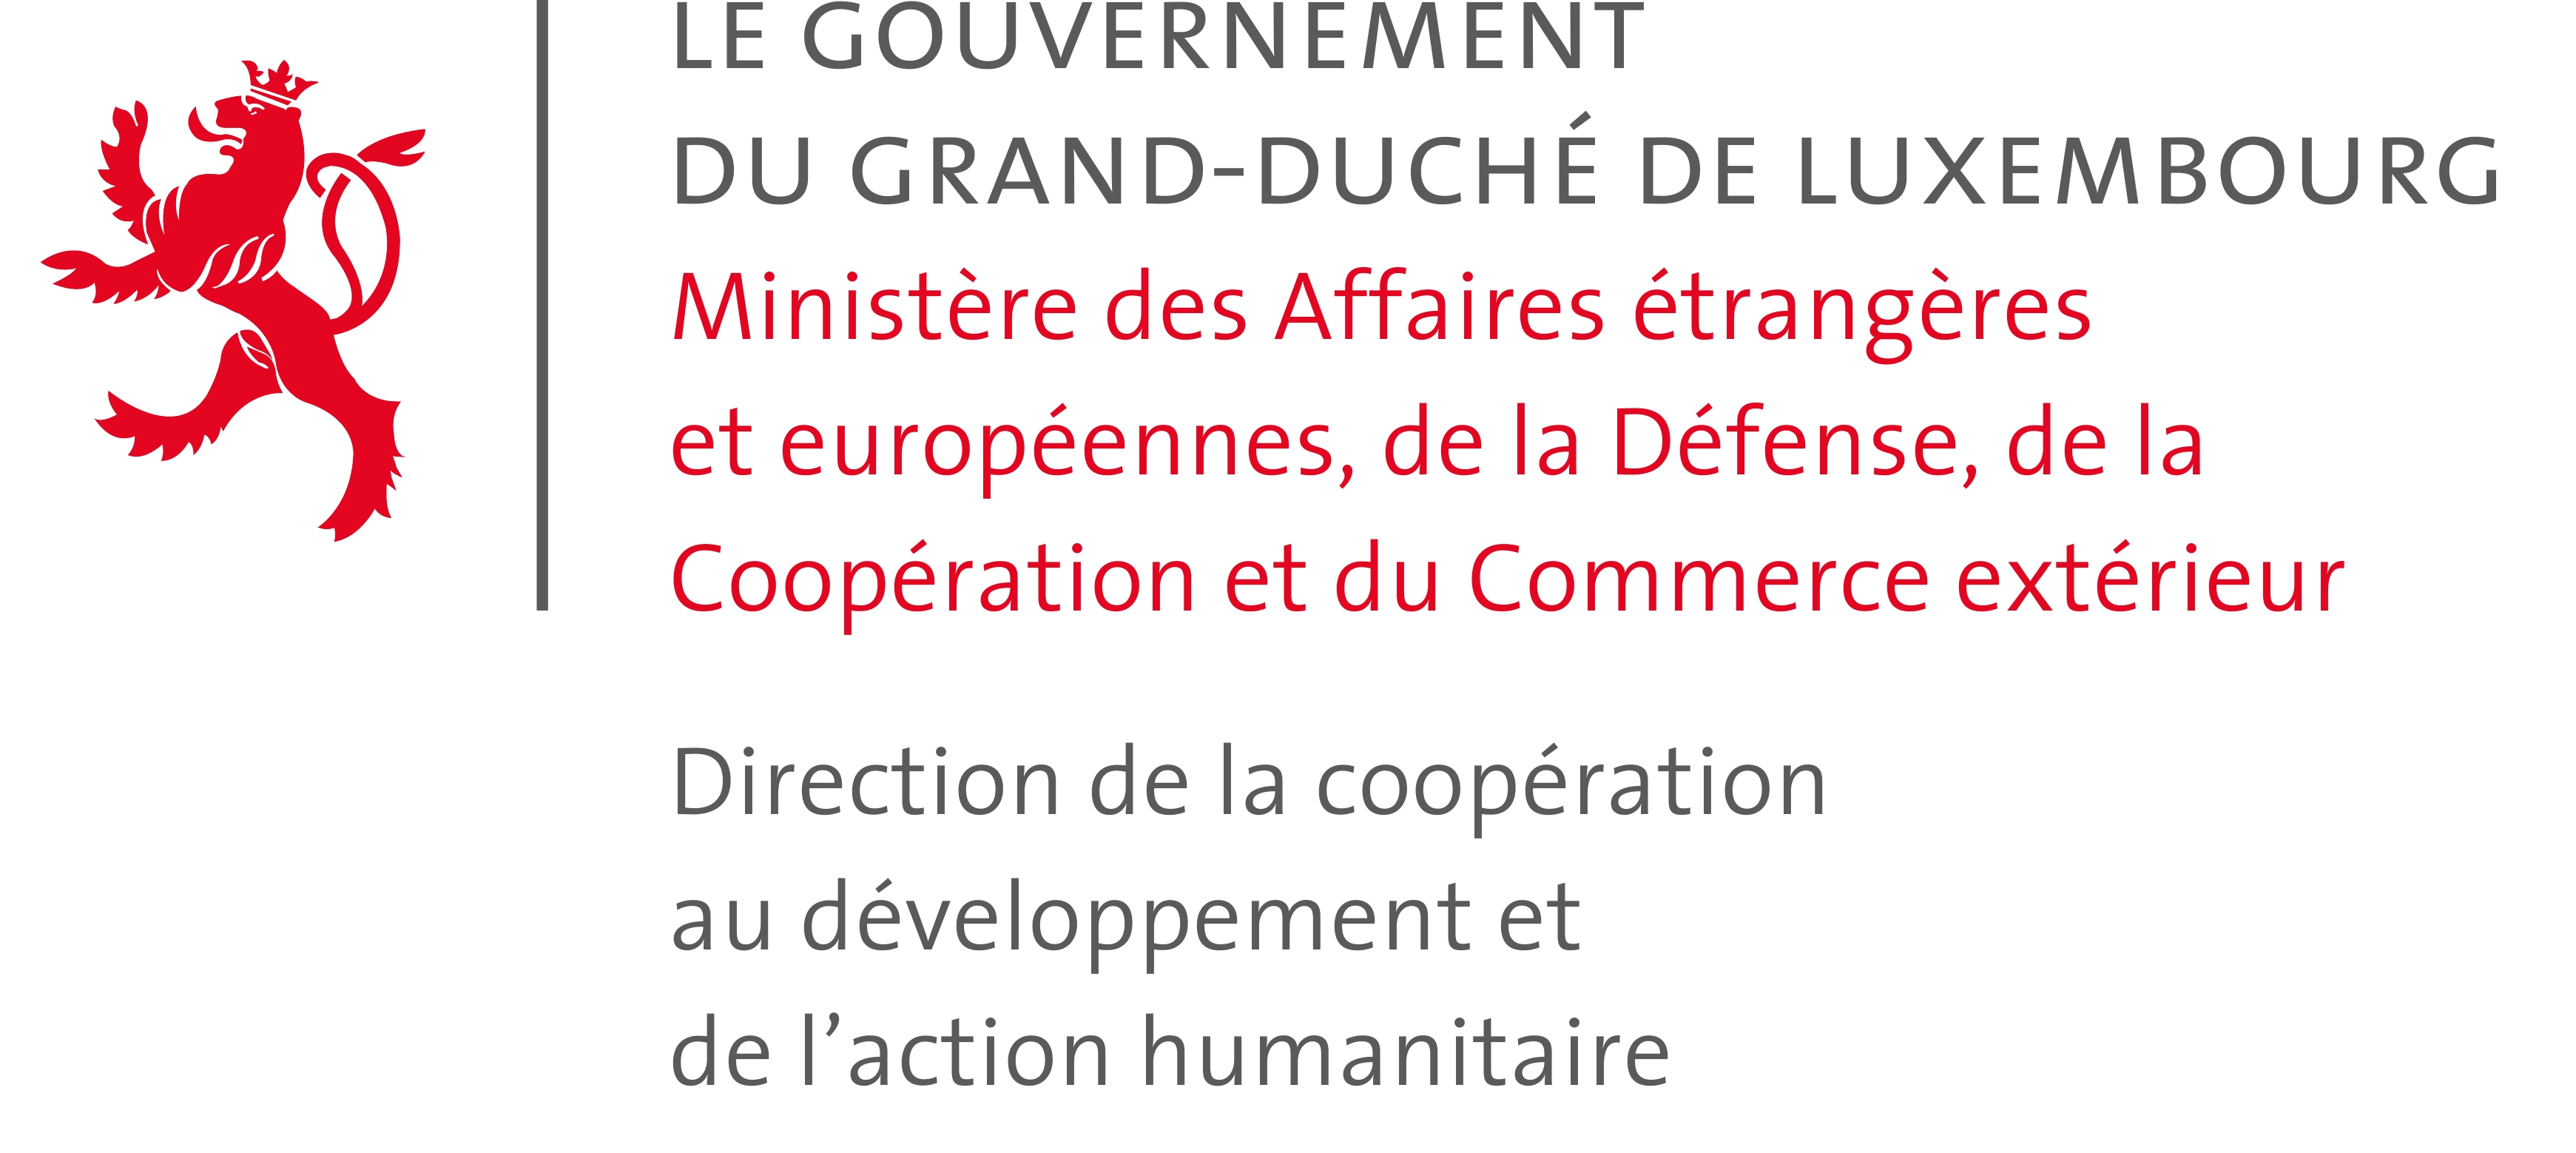  http://cooperation.gouvernement.lu